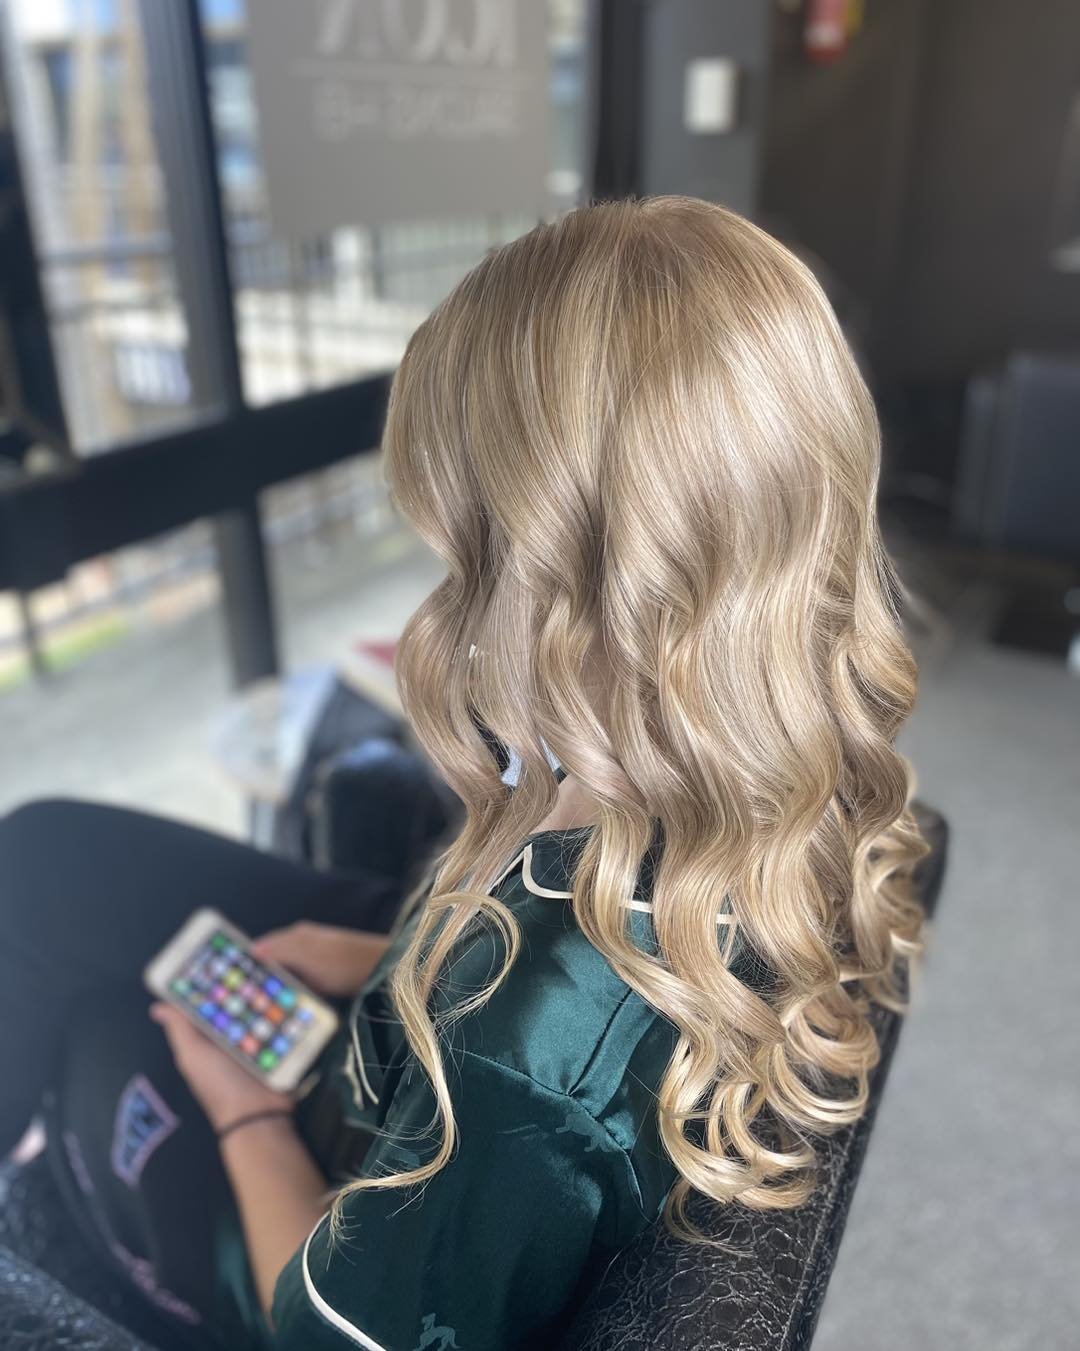 It was Formal Day for St James on Friday 😍✨ 

The lovely ladies we had the pleasure of styling were absolute stunners! We have you had a fantastic night 🤍 

.
.
.

📞 (07) 4317 4192
🌐 www.iconsalonshb.comau
📍 1/40 Torquay Road Pialba QLD

.
.
.

